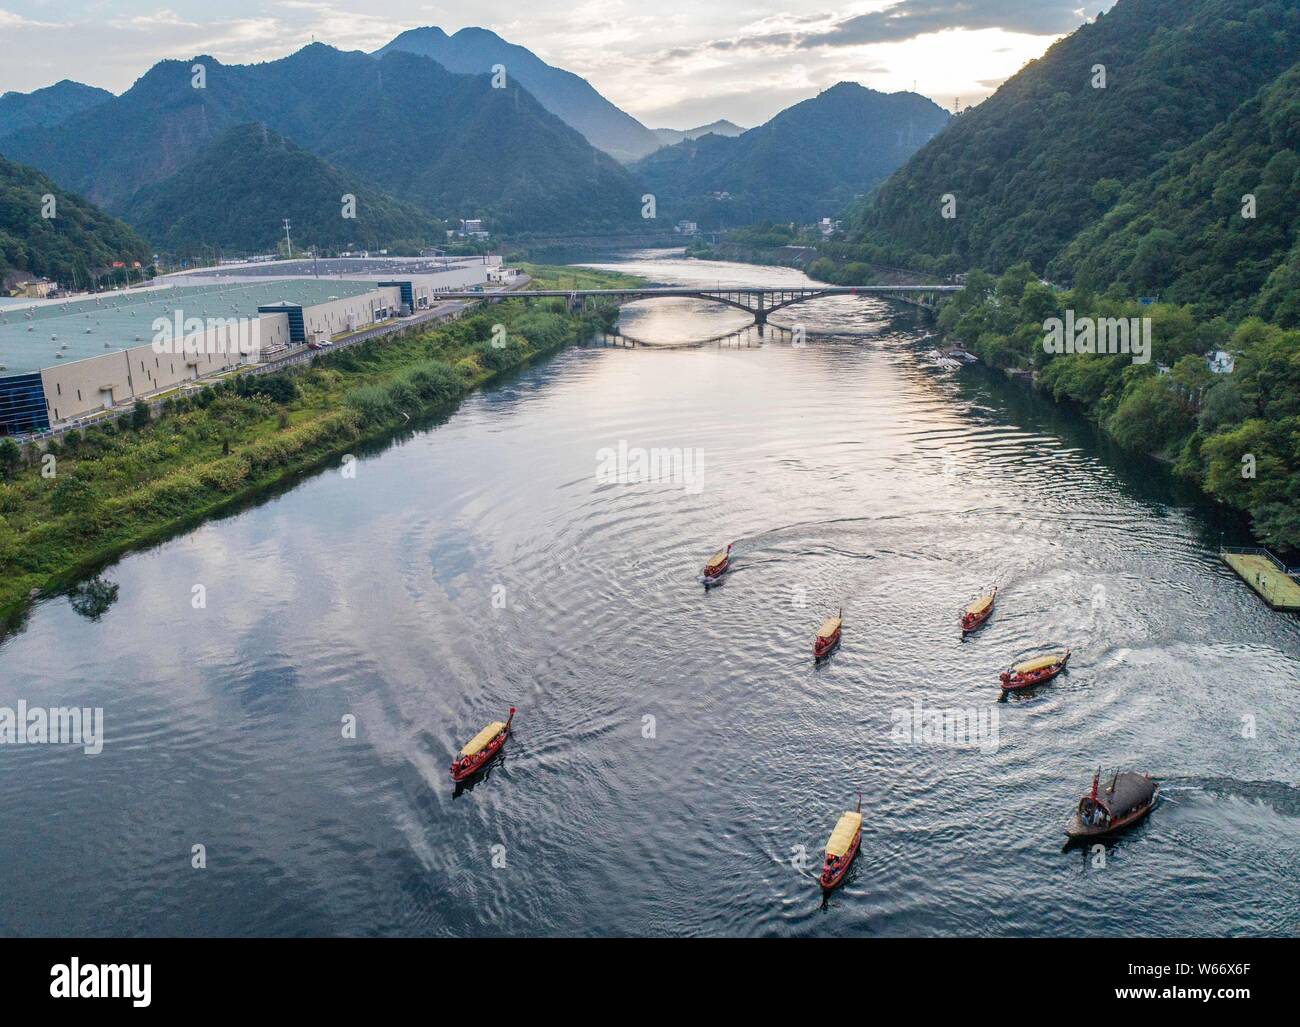 Tourist boats ply the Xinanjiang River, where the water temperature remains at around 17 degrees Celcius, at a scenic spot in Jiande city, Hangzhou ci Stock Photo